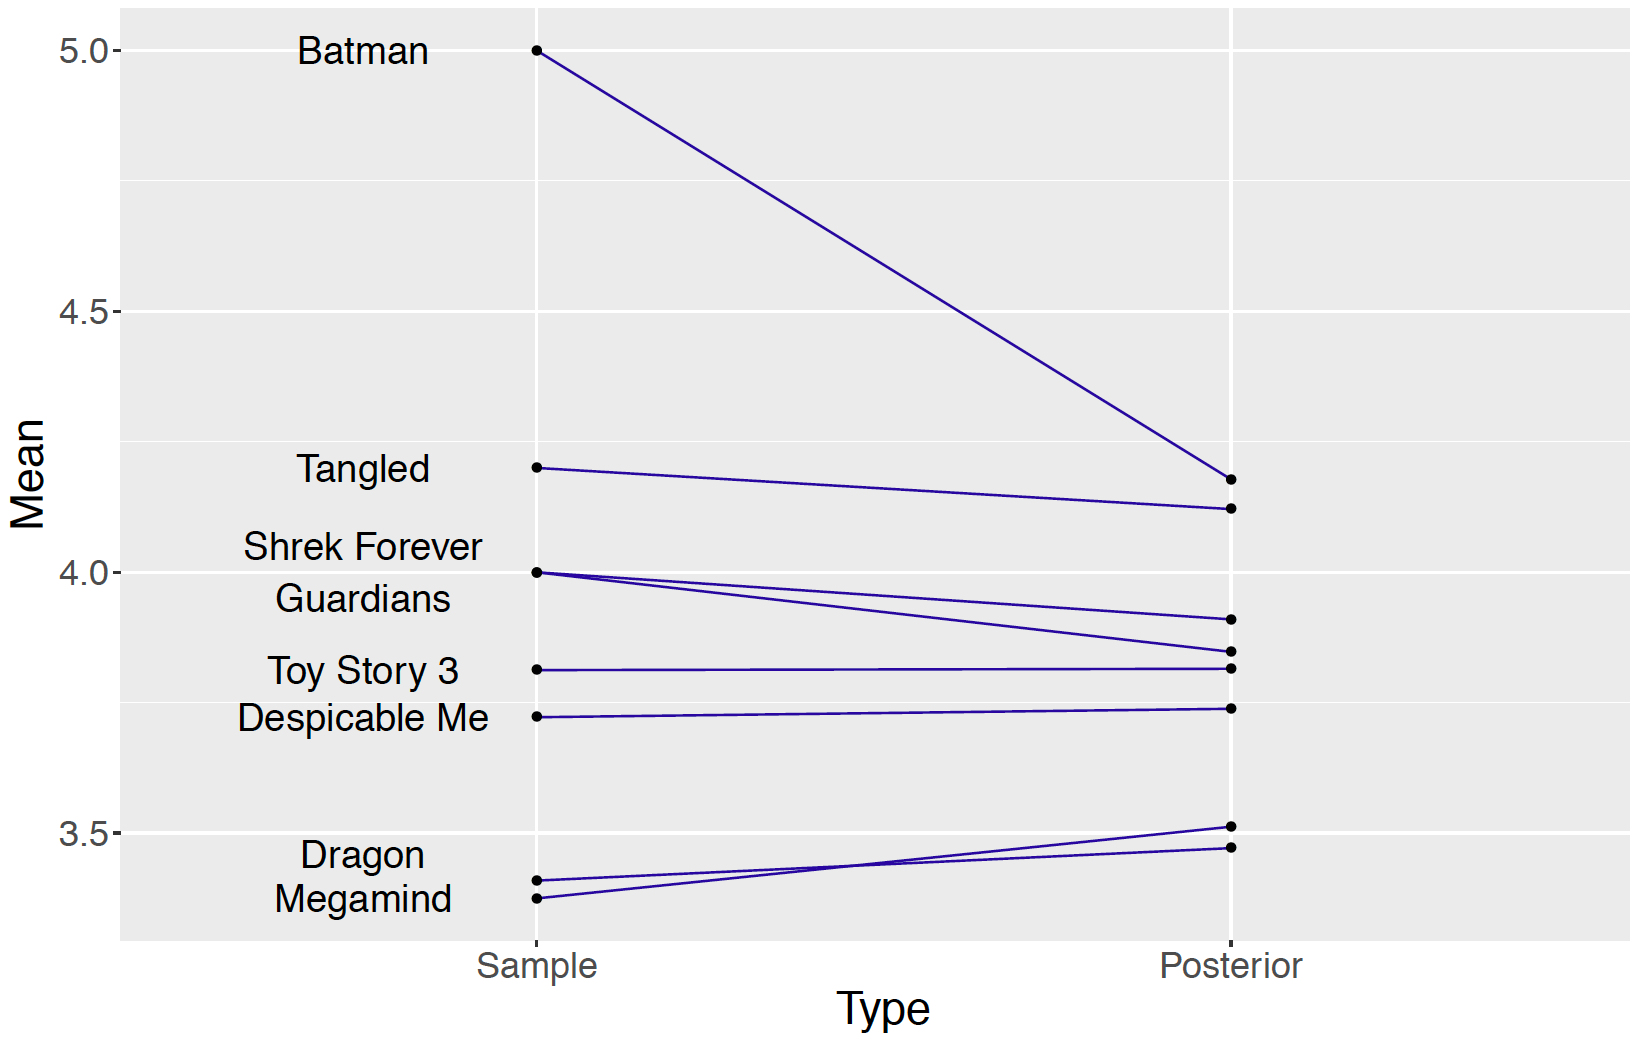 Shrinkage plot of sample means and posterior means of movie ratings for eight movies.